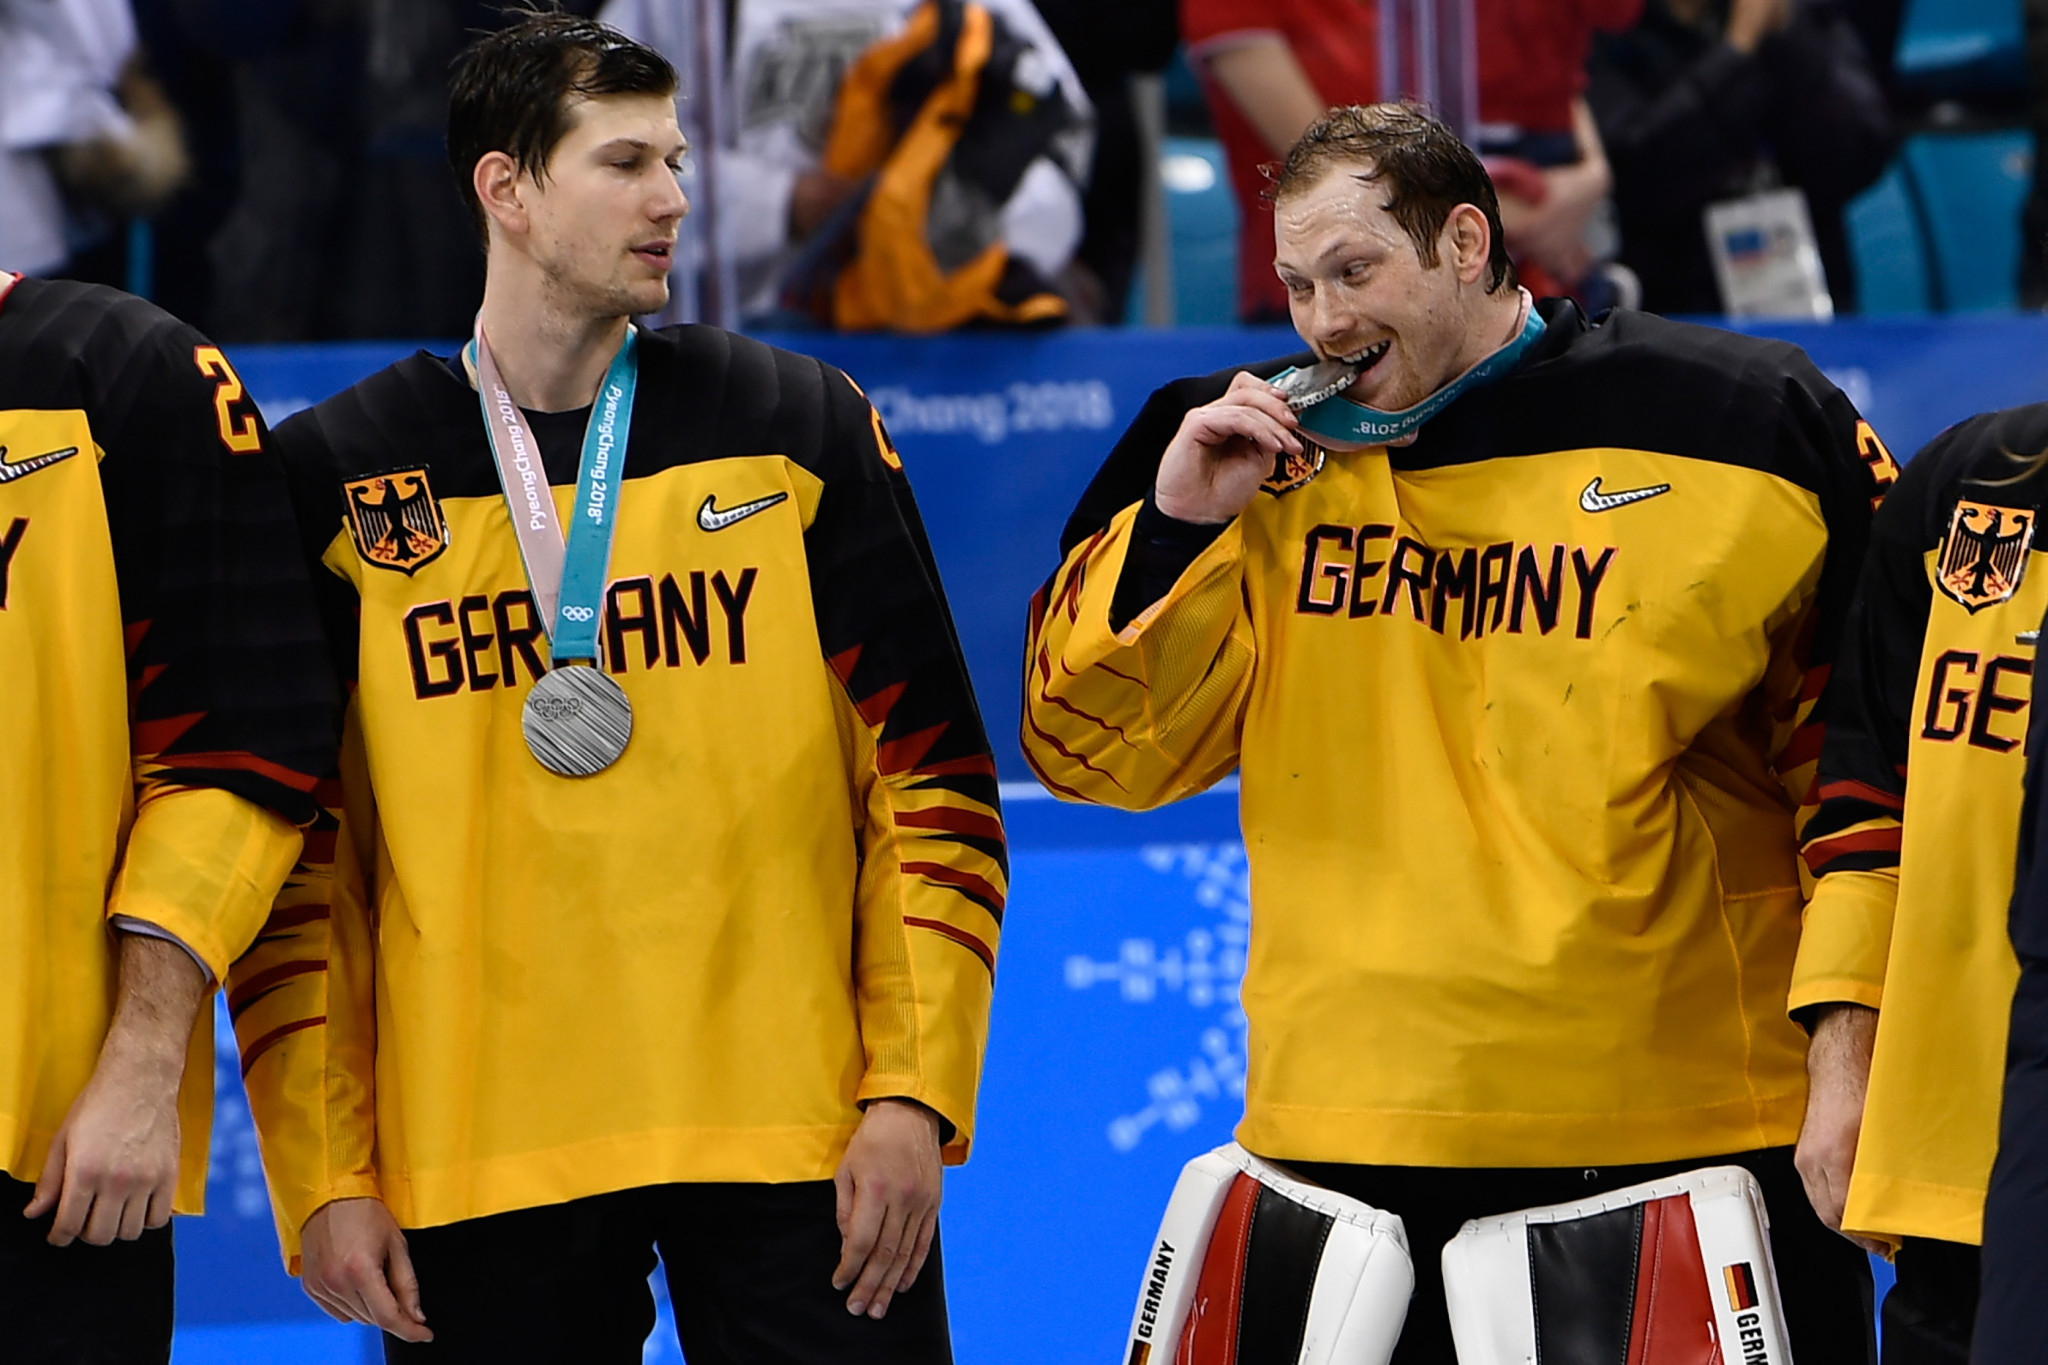 Germany won 31 medals at the Pyeongchang 2018 Winter Olympics ©Getty Images